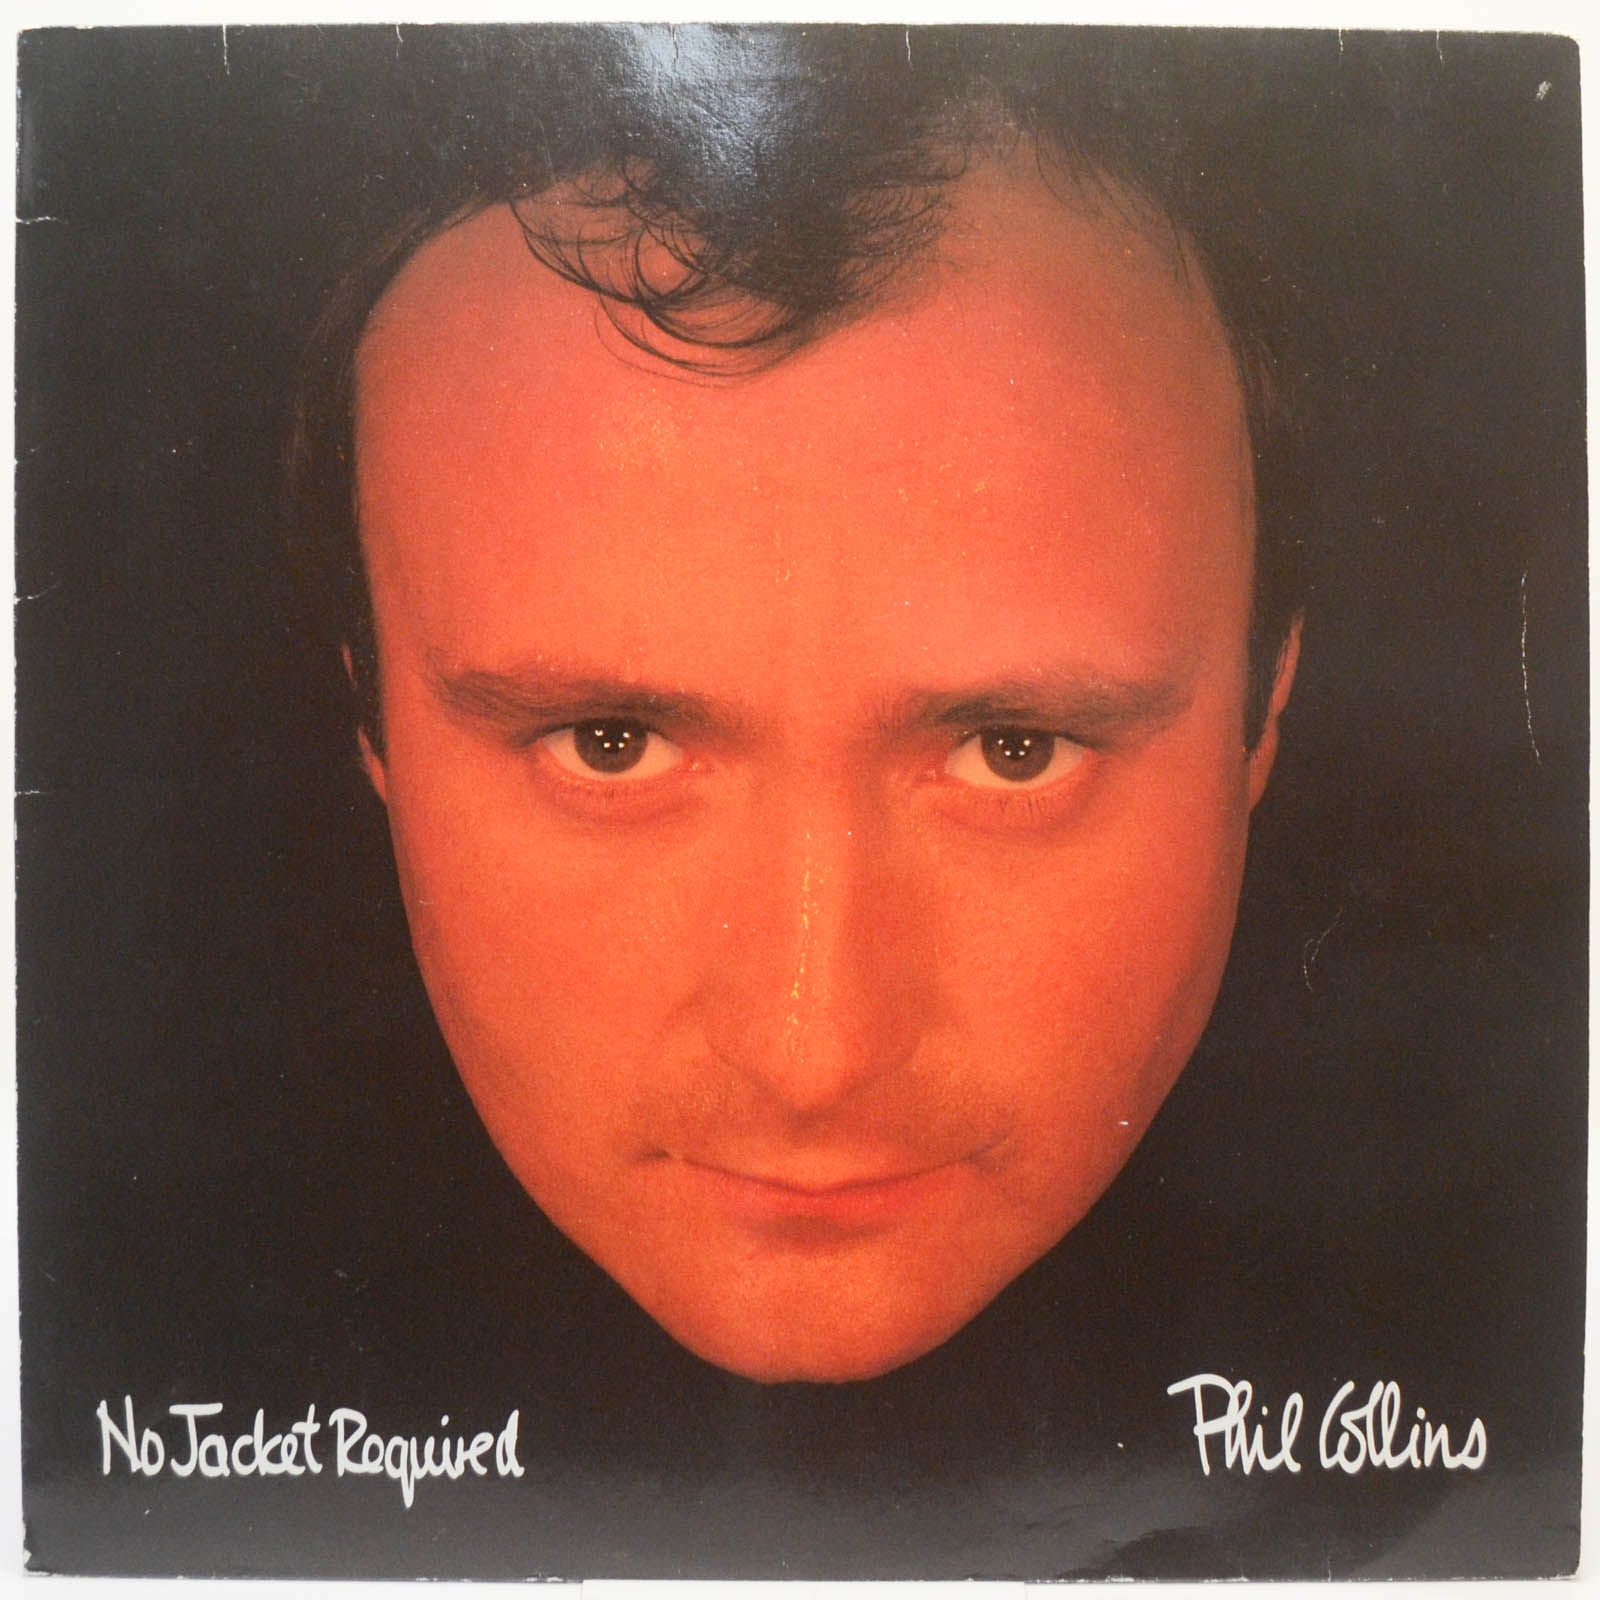 Phil Collins — No Jacket Required, 1985